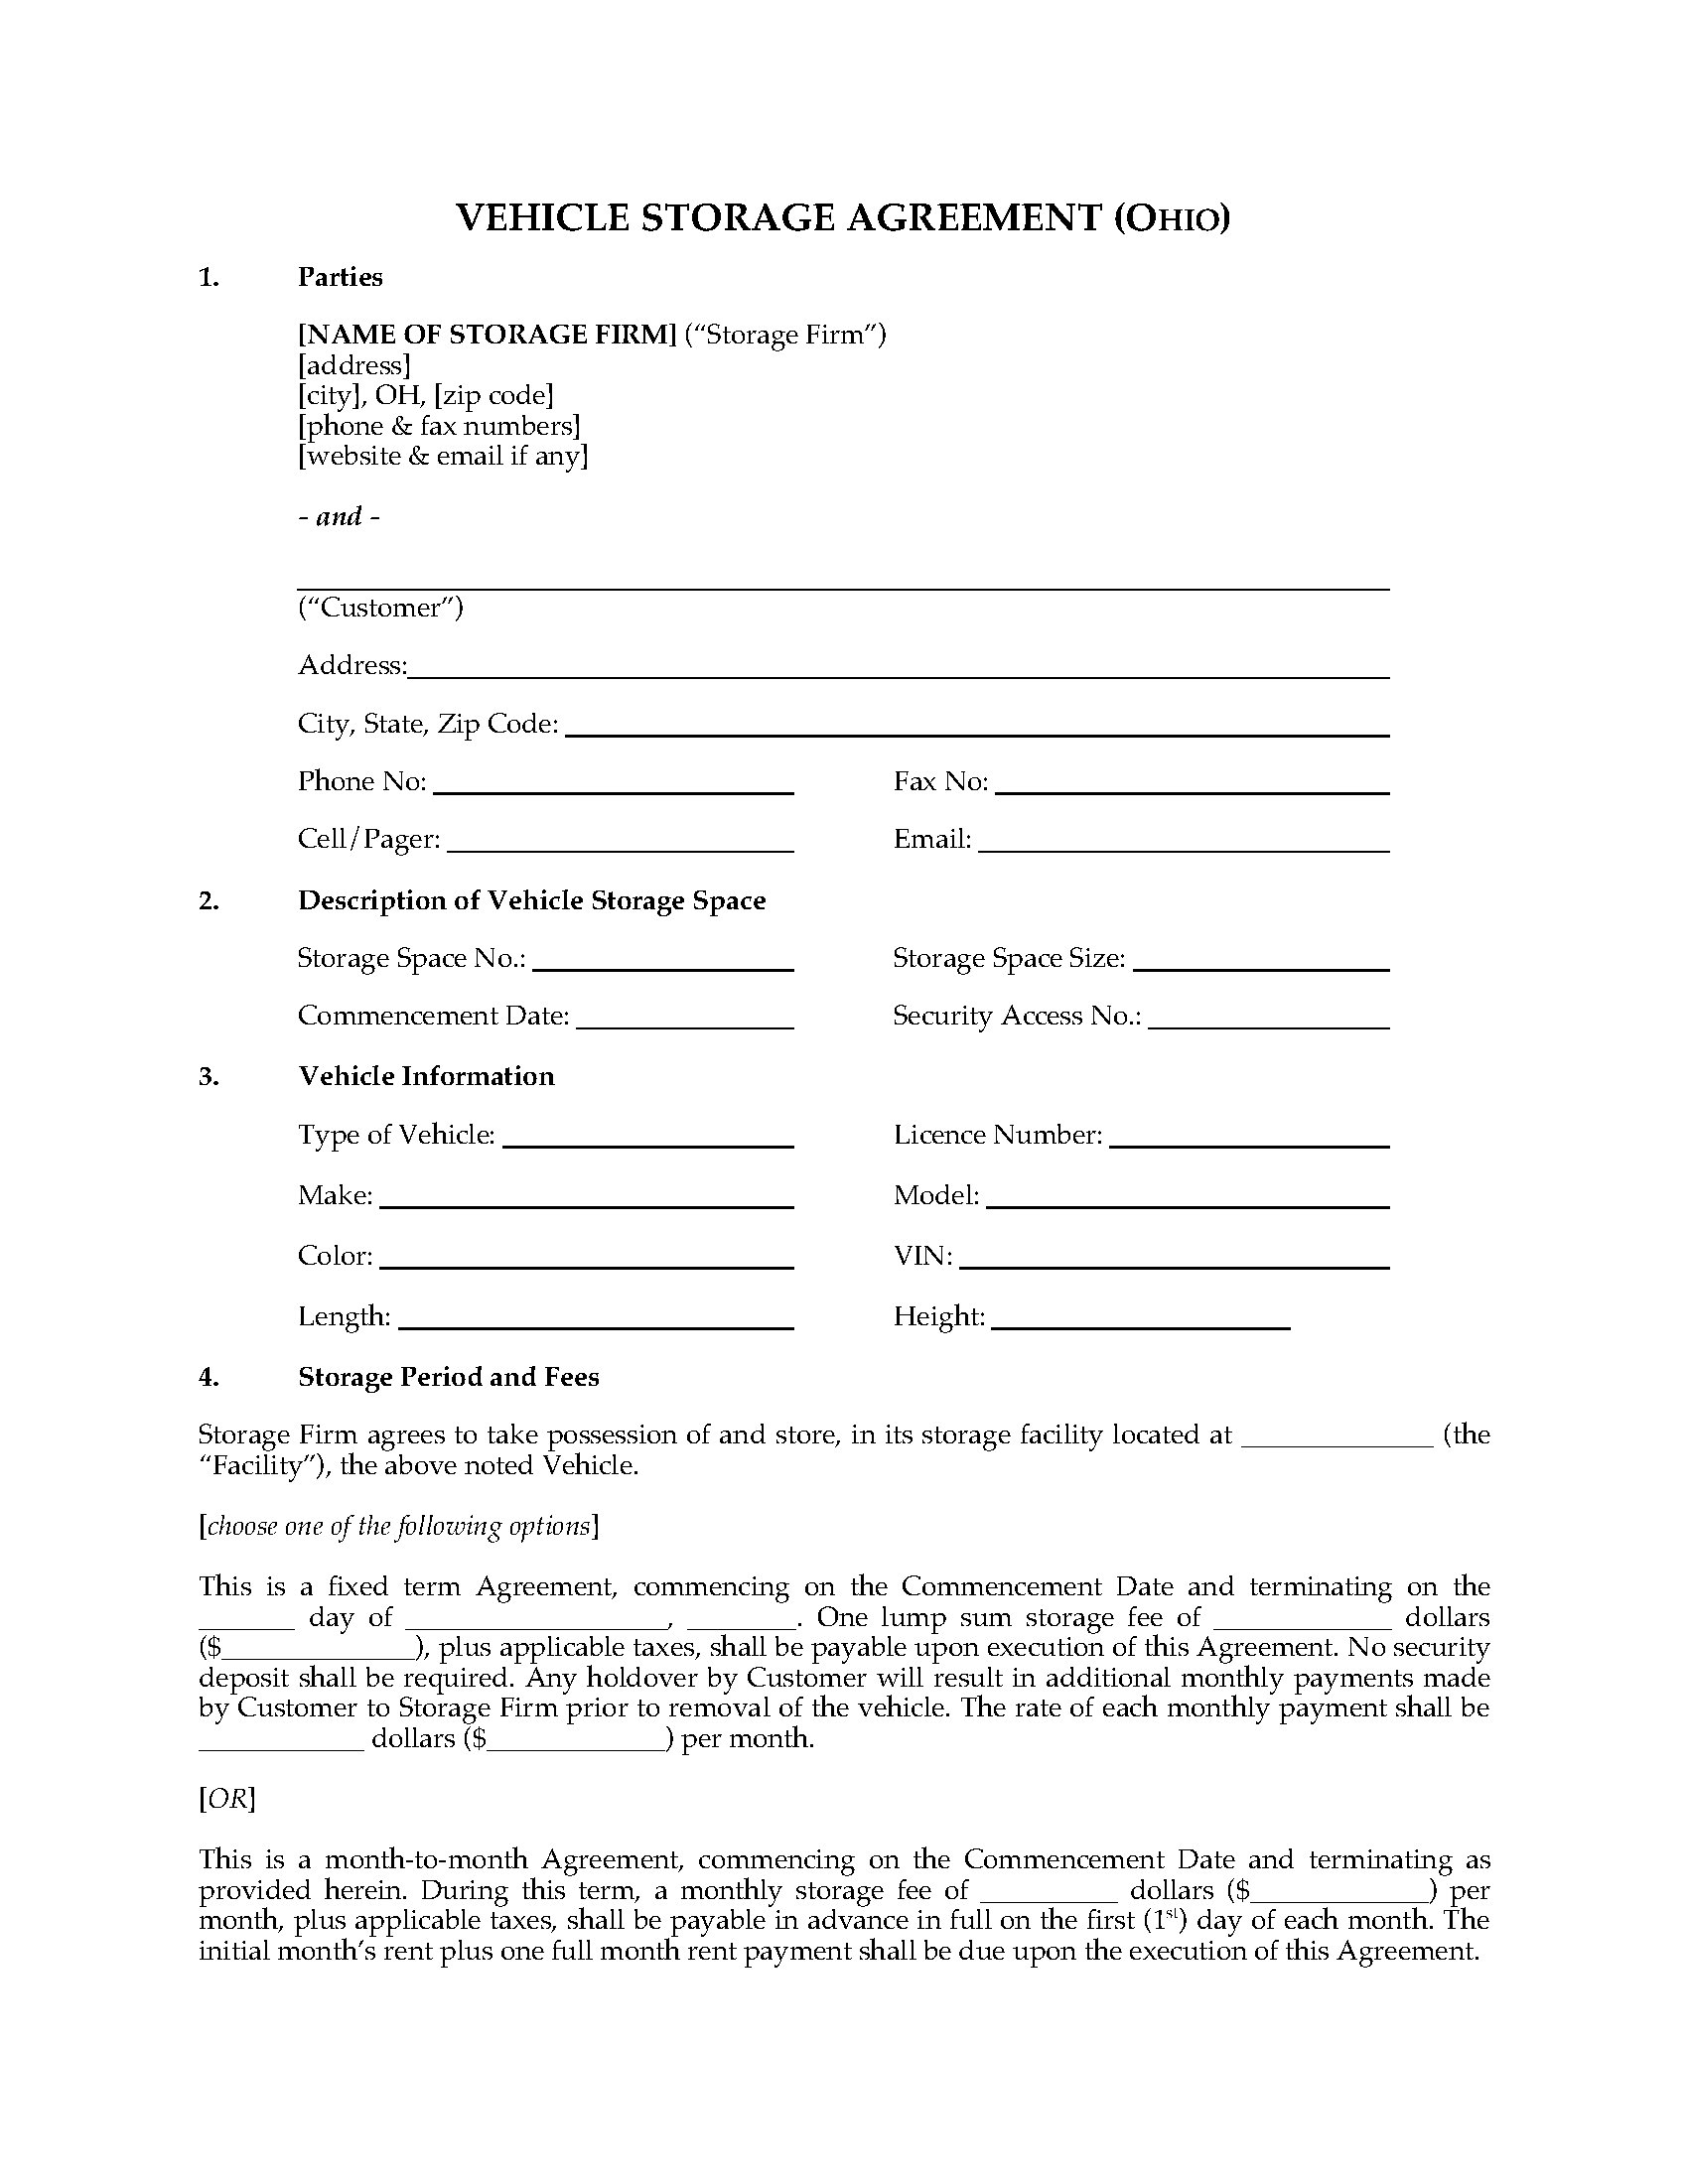 Ohio Vehicle Storage Agreement Form  Legal Forms and Business Within lease of vehicle agreement template